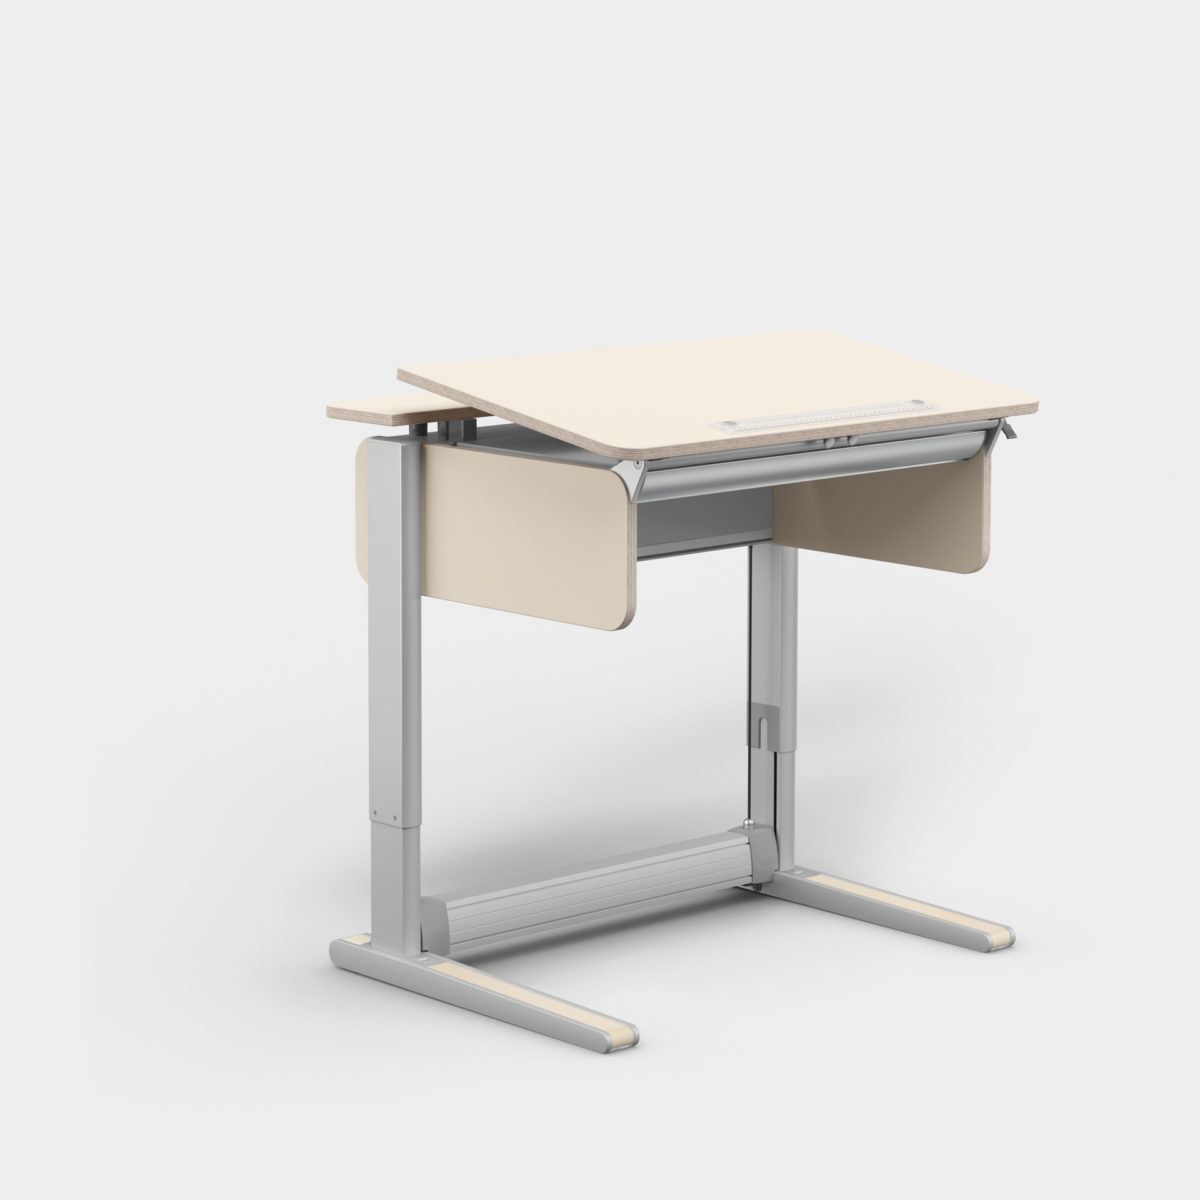 moll unique ergonomic standing desks are probably the best standing desk in South Africa.